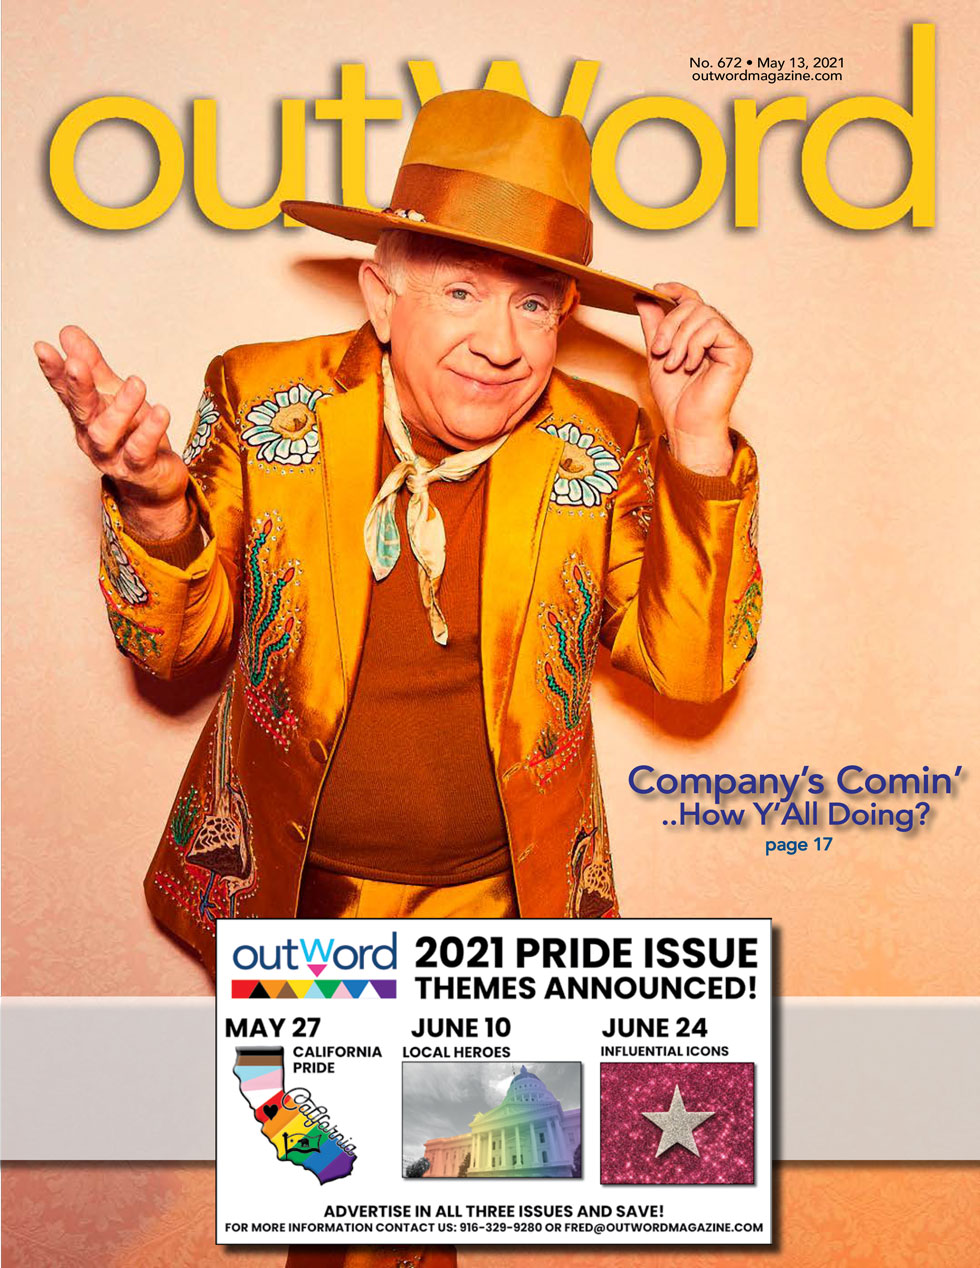 May 13, 2021 | Our Unofficial official Pre-Pride Issue is Out Now!